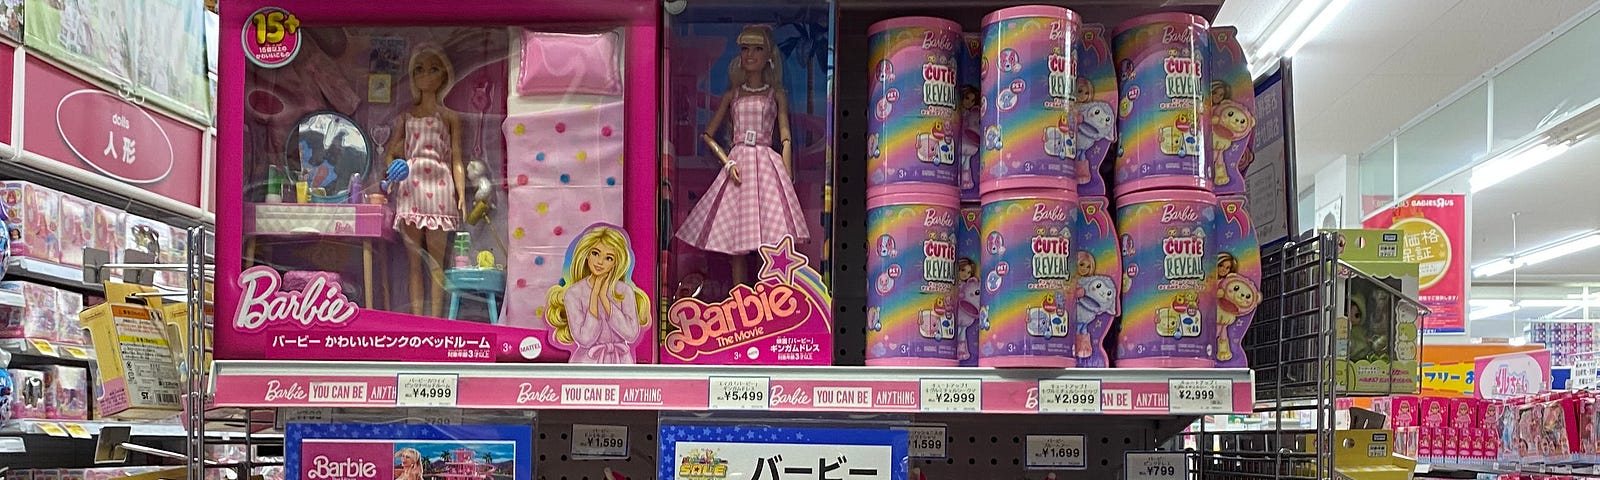 A display of conventional blonde Barbie dolls at Toys ‘R Us in Japan.